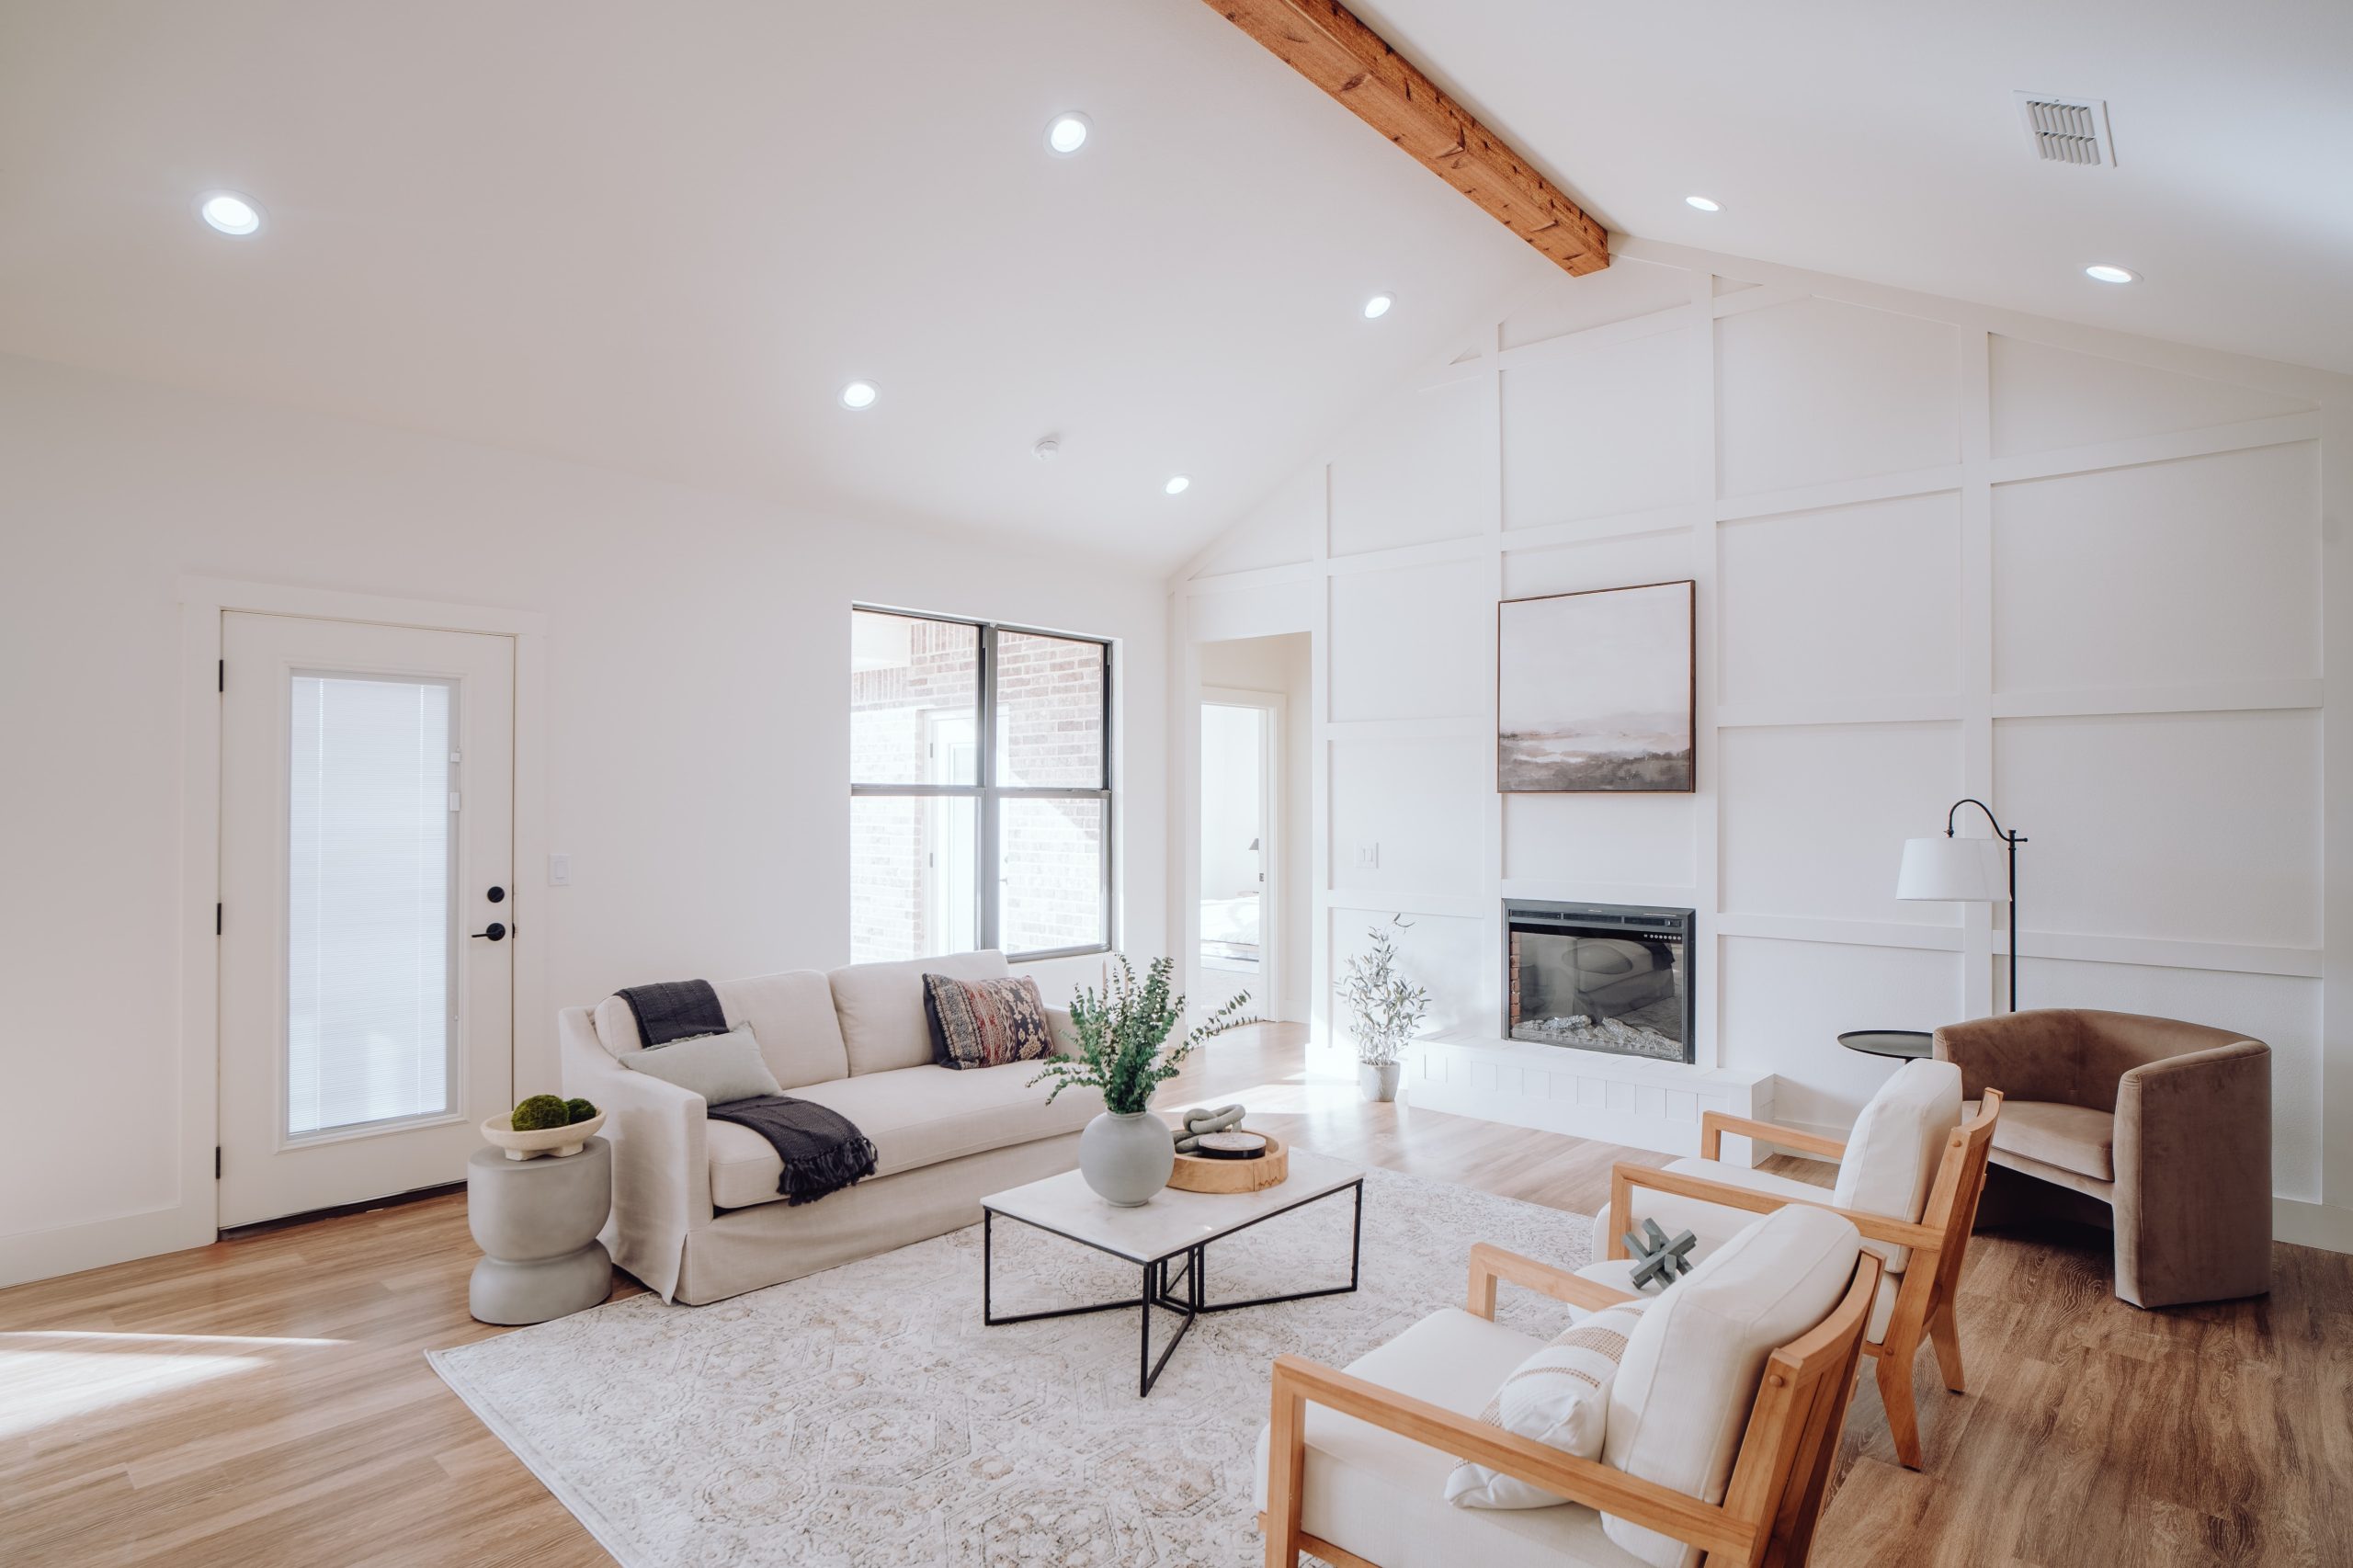 How to Create an Open Floor Plan: 7 Tips for a Spacious and Fluid Living Space